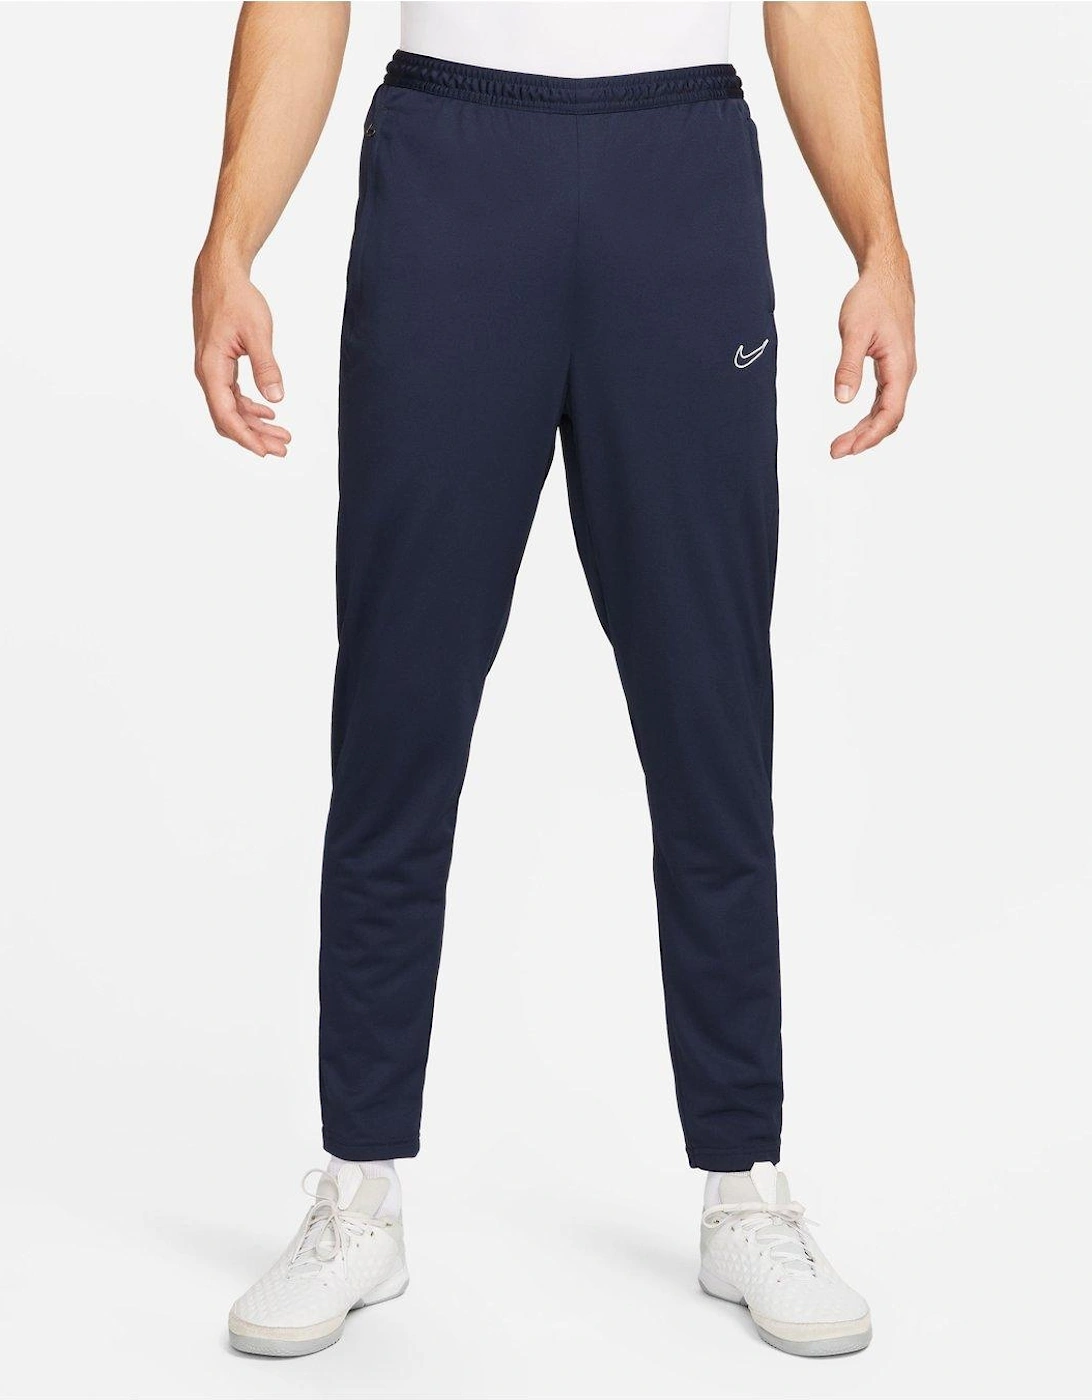 Academy 23 Dry Tracksuit - Navy